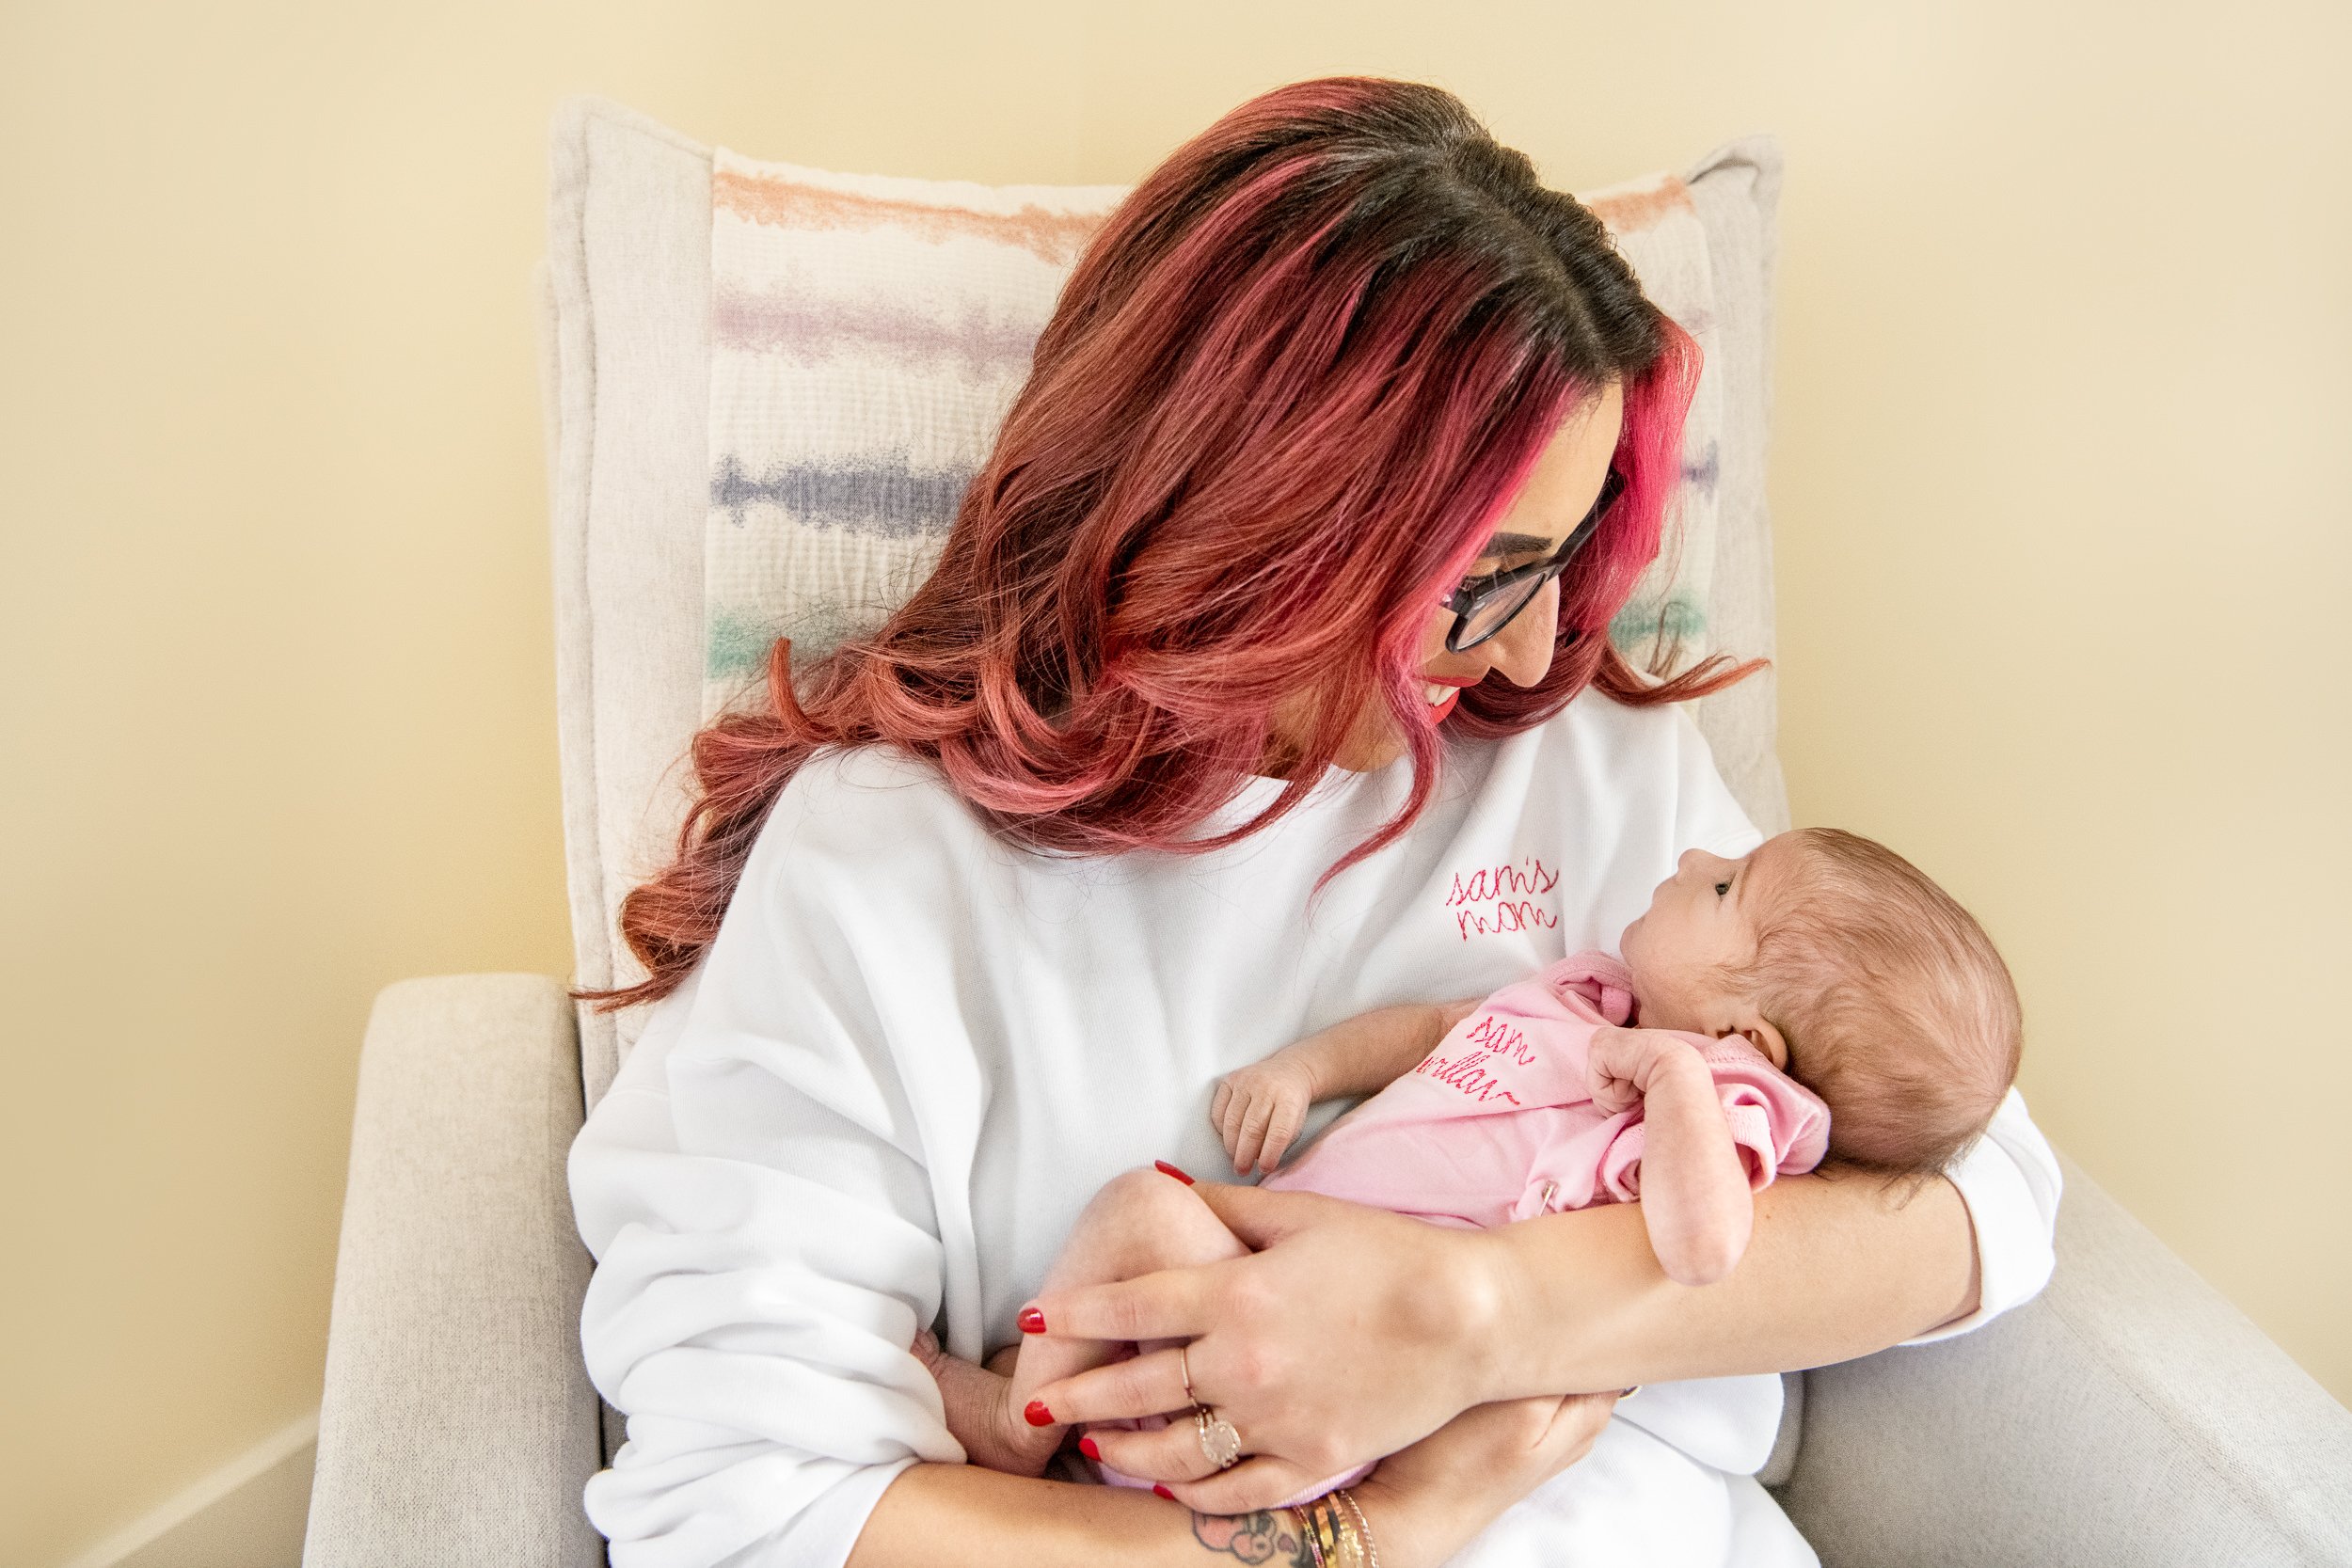  A mother with red hair holds her newborn baby girl captured by Nicole Hawkins Photography. New Jersey Newborn photographer spunky momma #nicolehawkinsphotography #NJfamilyphotographer #inhomenewbornsession #nicolehawkinsnewborns #NJnewbornphotograph